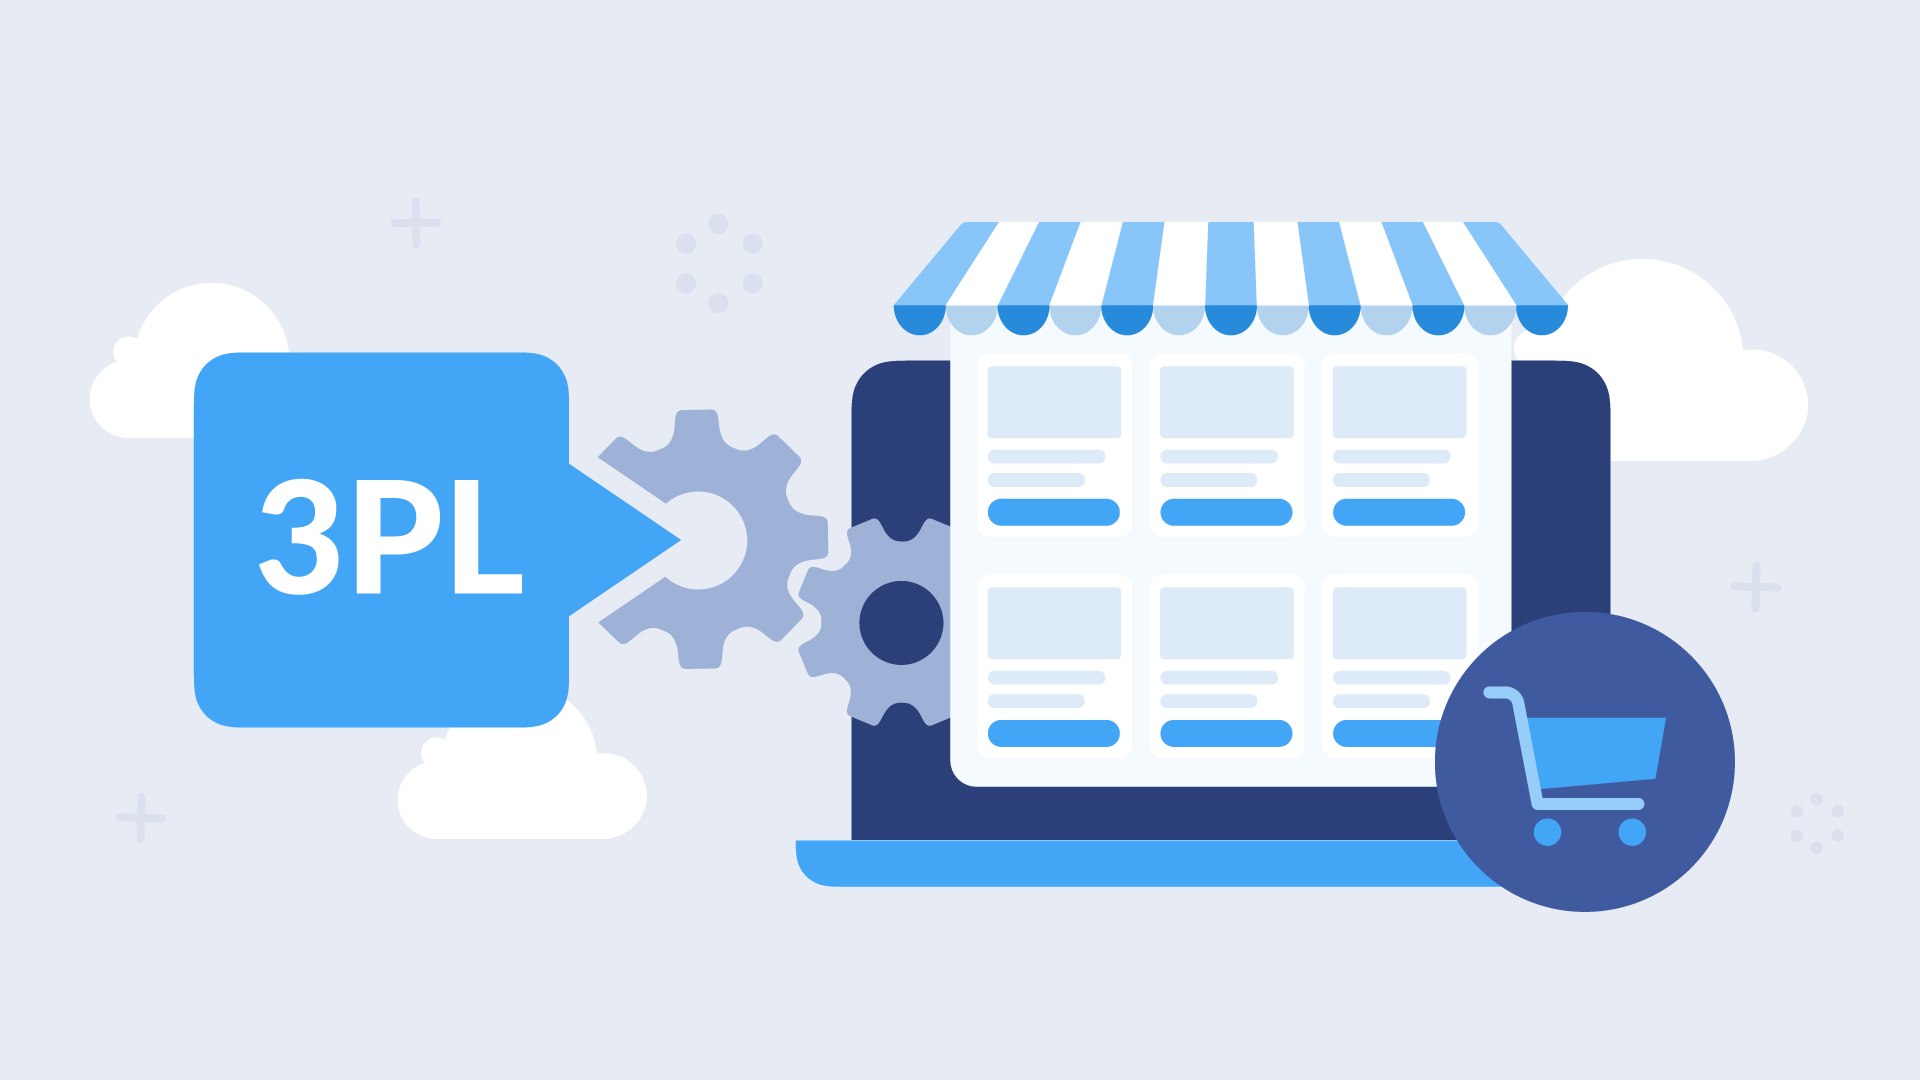 e-Commerce platforms integration as a way to gain new customers for 3PLs